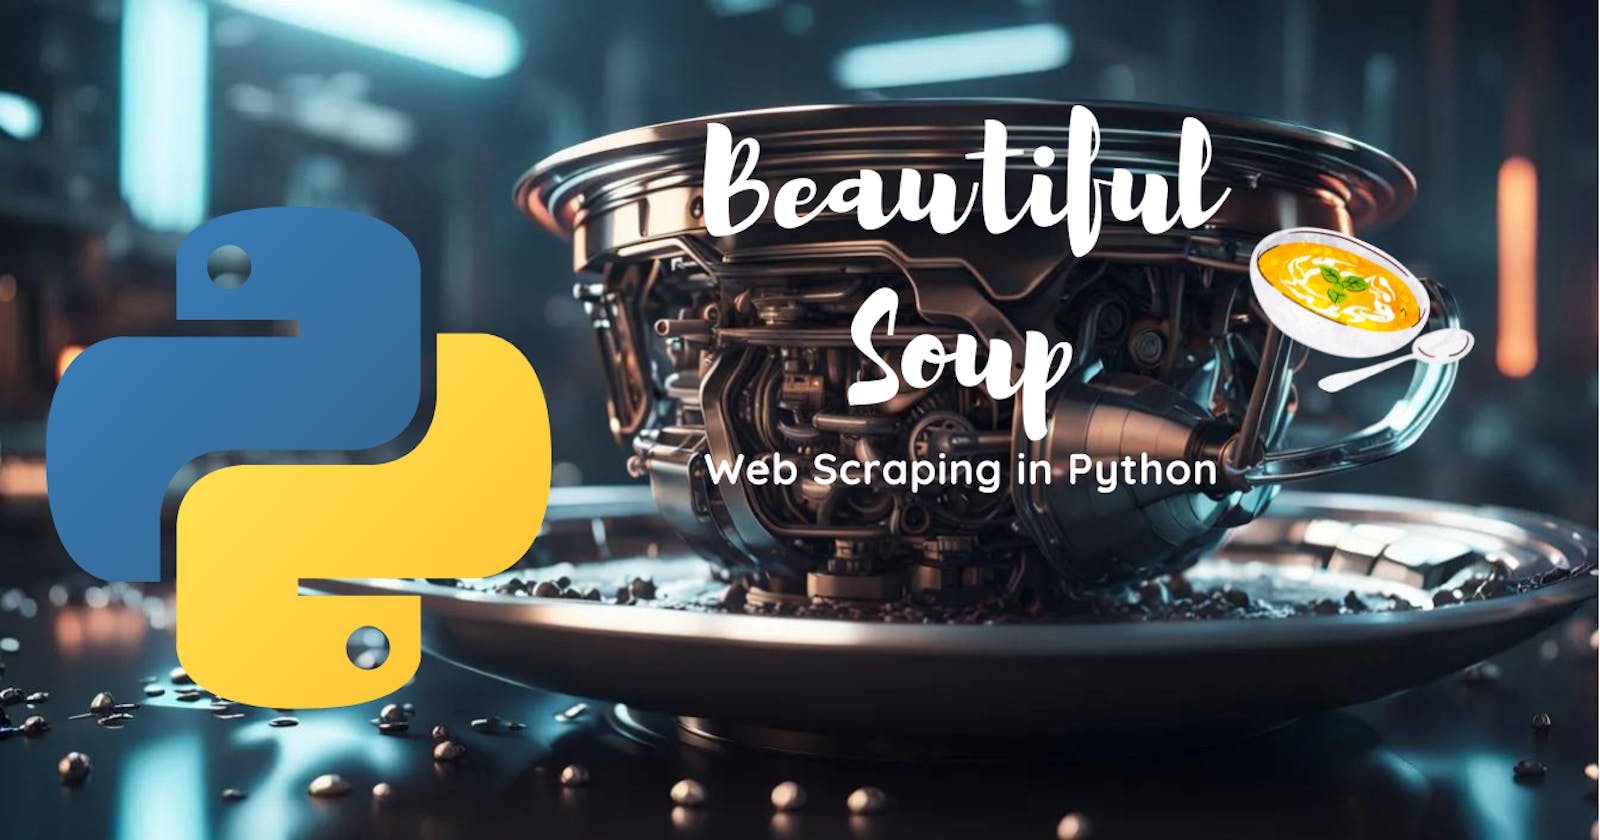 Diving into Web Scraping with Beautiful Soup in Python: Making a Database of Oscar awarded Movies